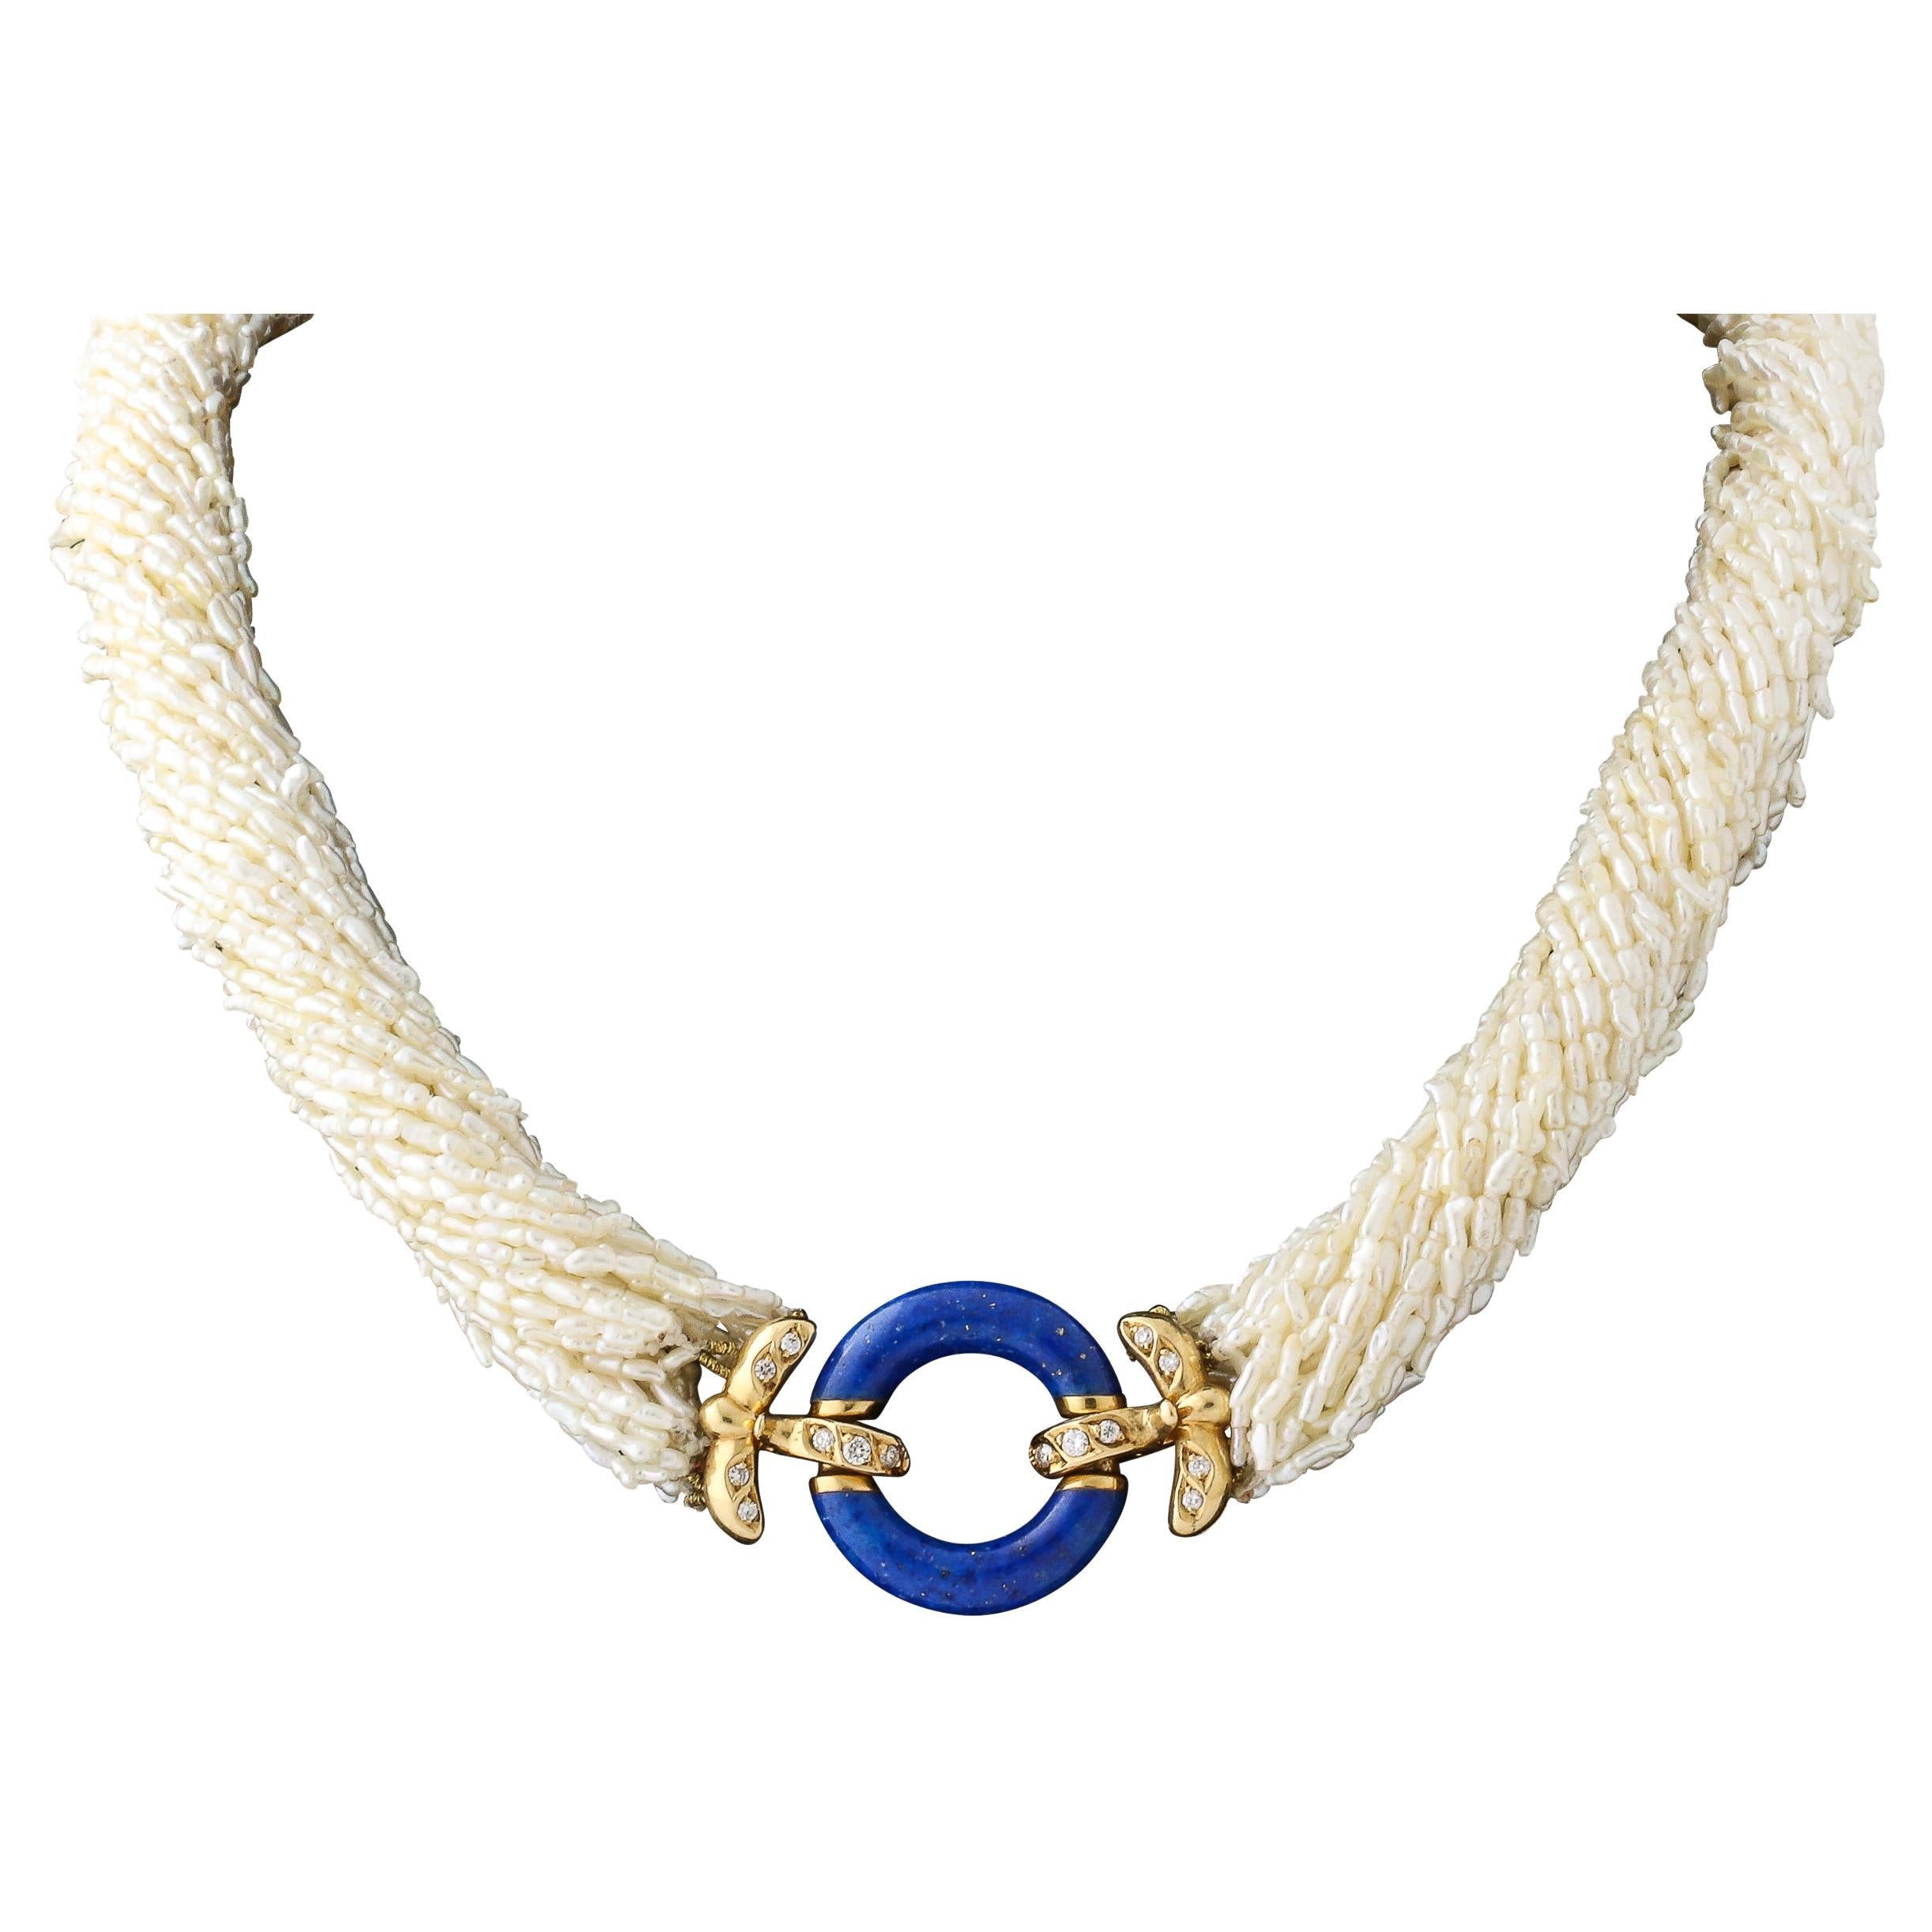 Art Deco Style Seed Pearl Multi Strand Necklace with Lapis, Gold & Diamond Clasp